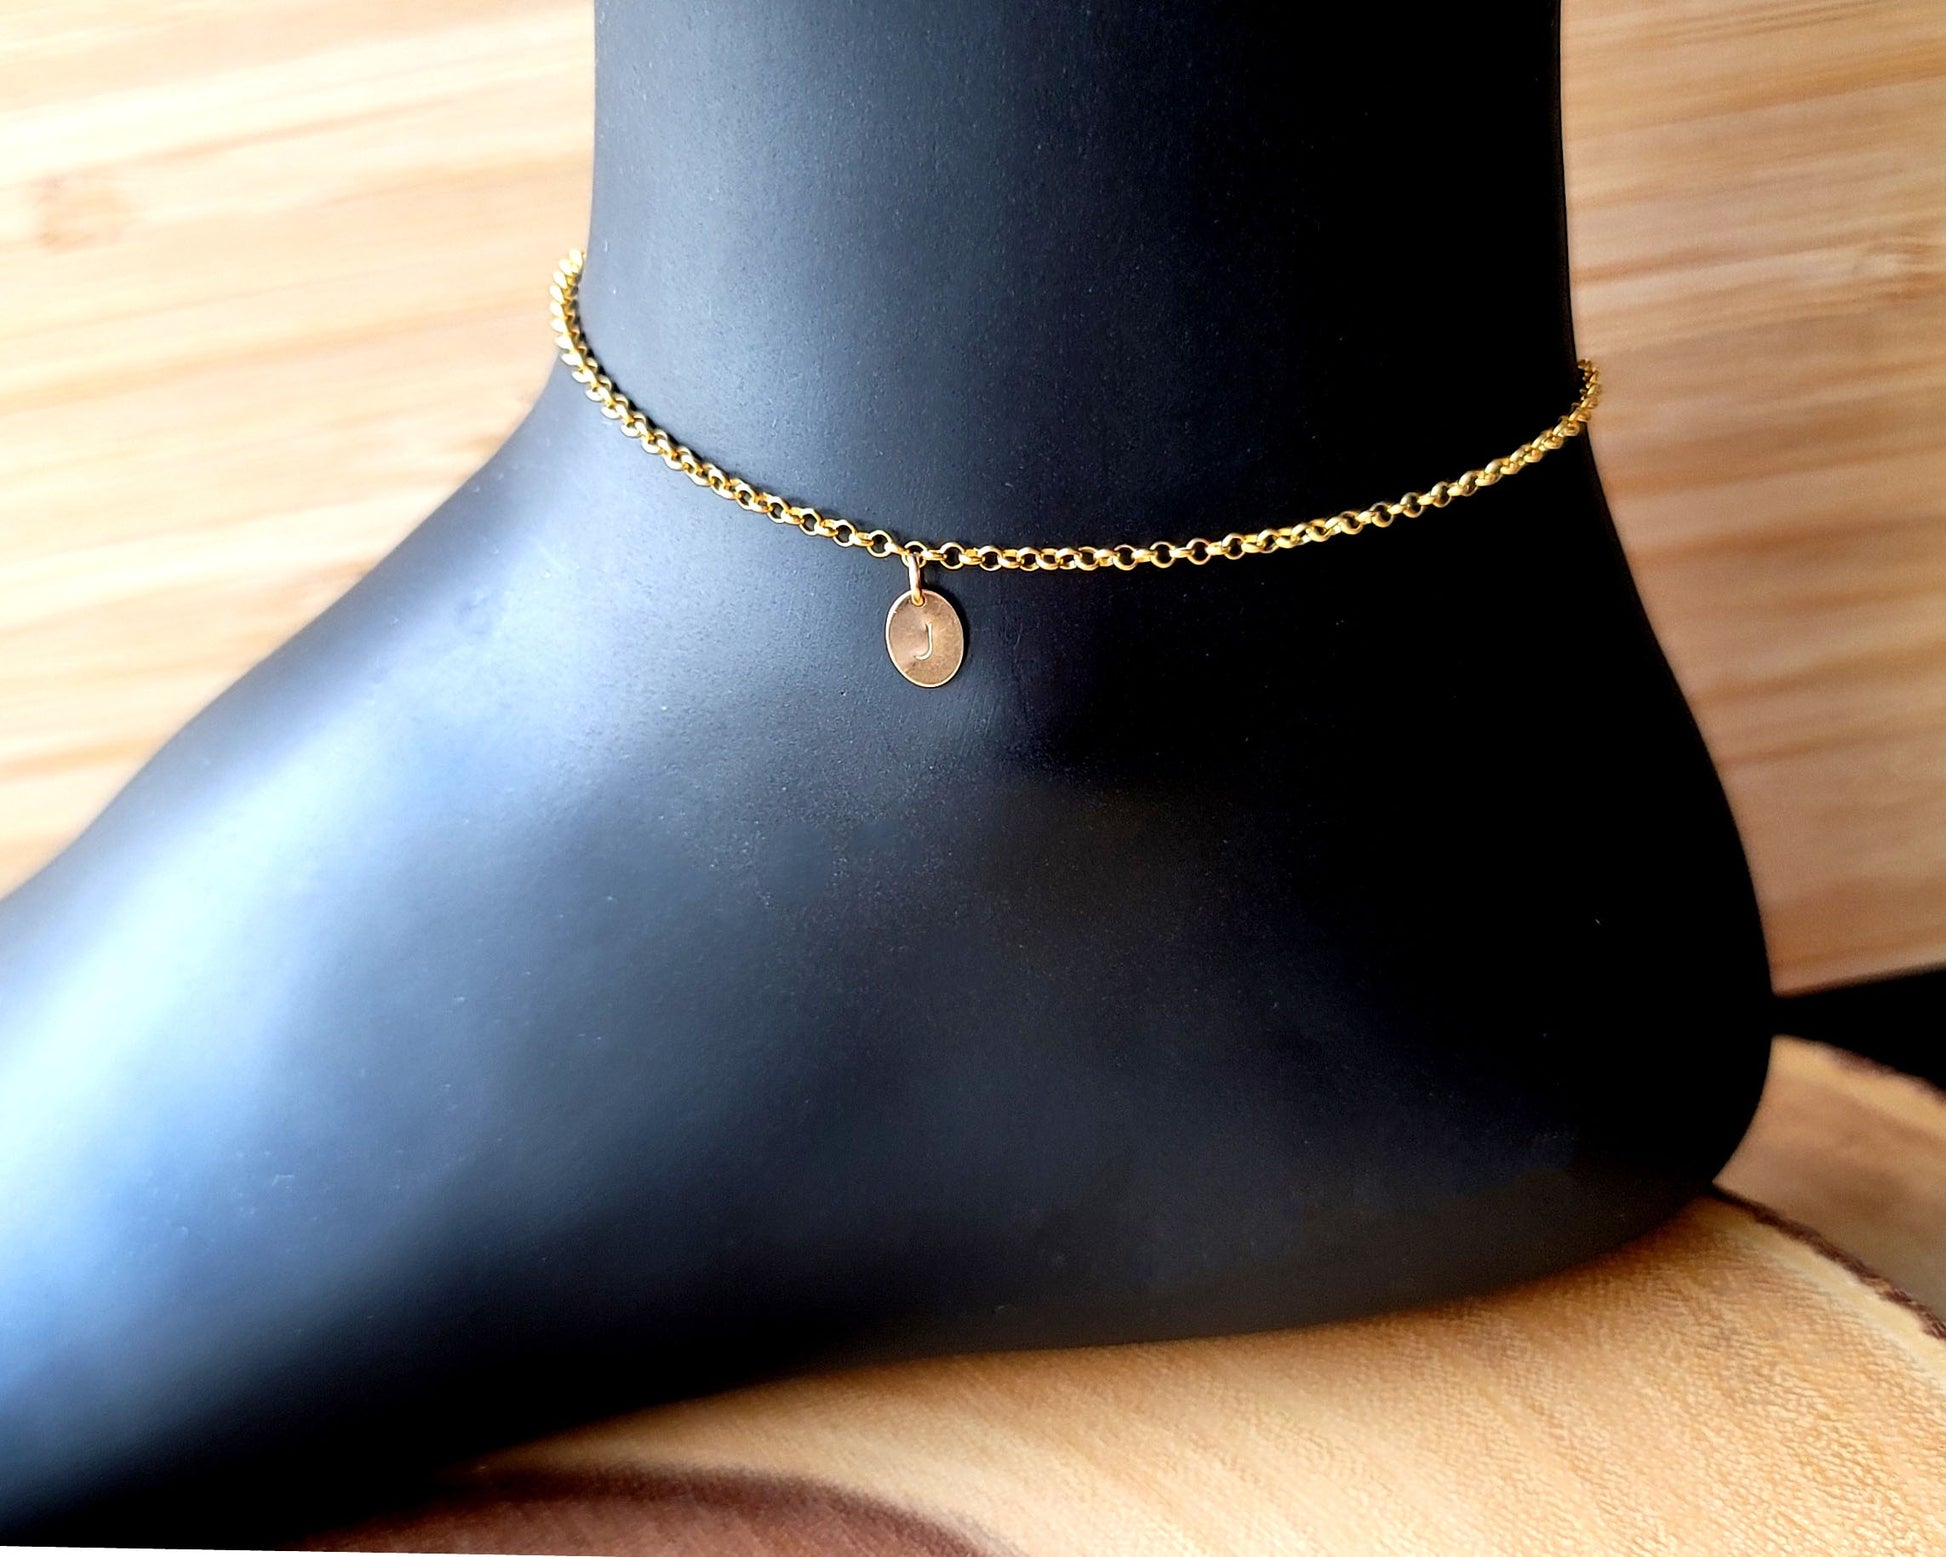 Personalized Gold Initial Ankle Bracelet, Anklet, a minimalist style anklet with a small initial pendant on rolo style chain